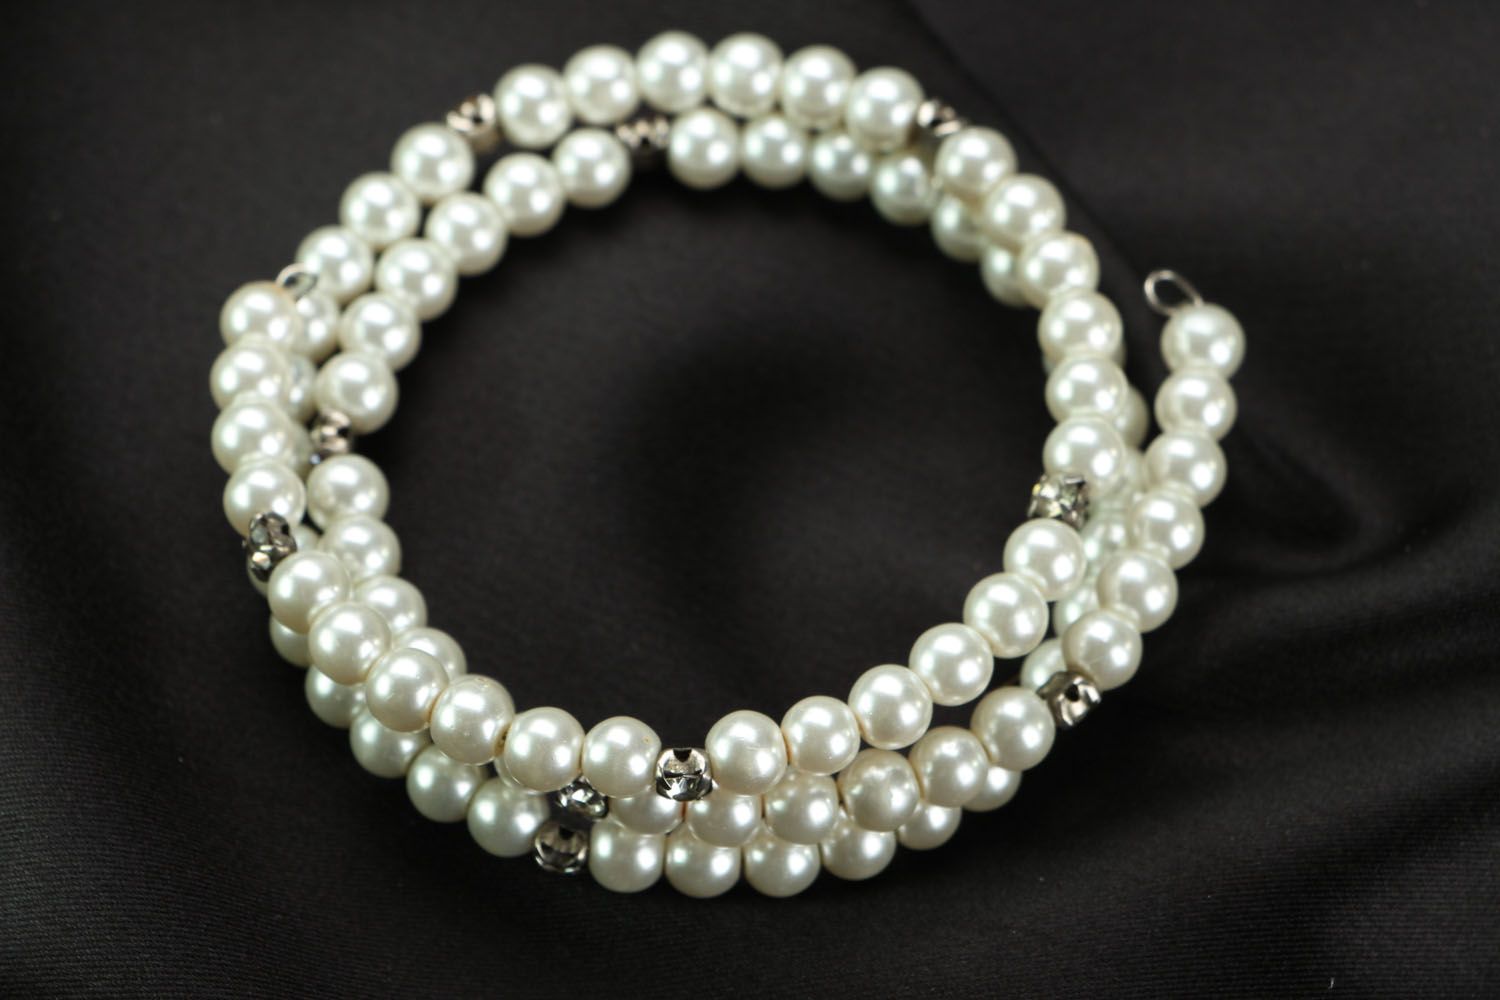 Bracelet made of artificial pearls photo 1